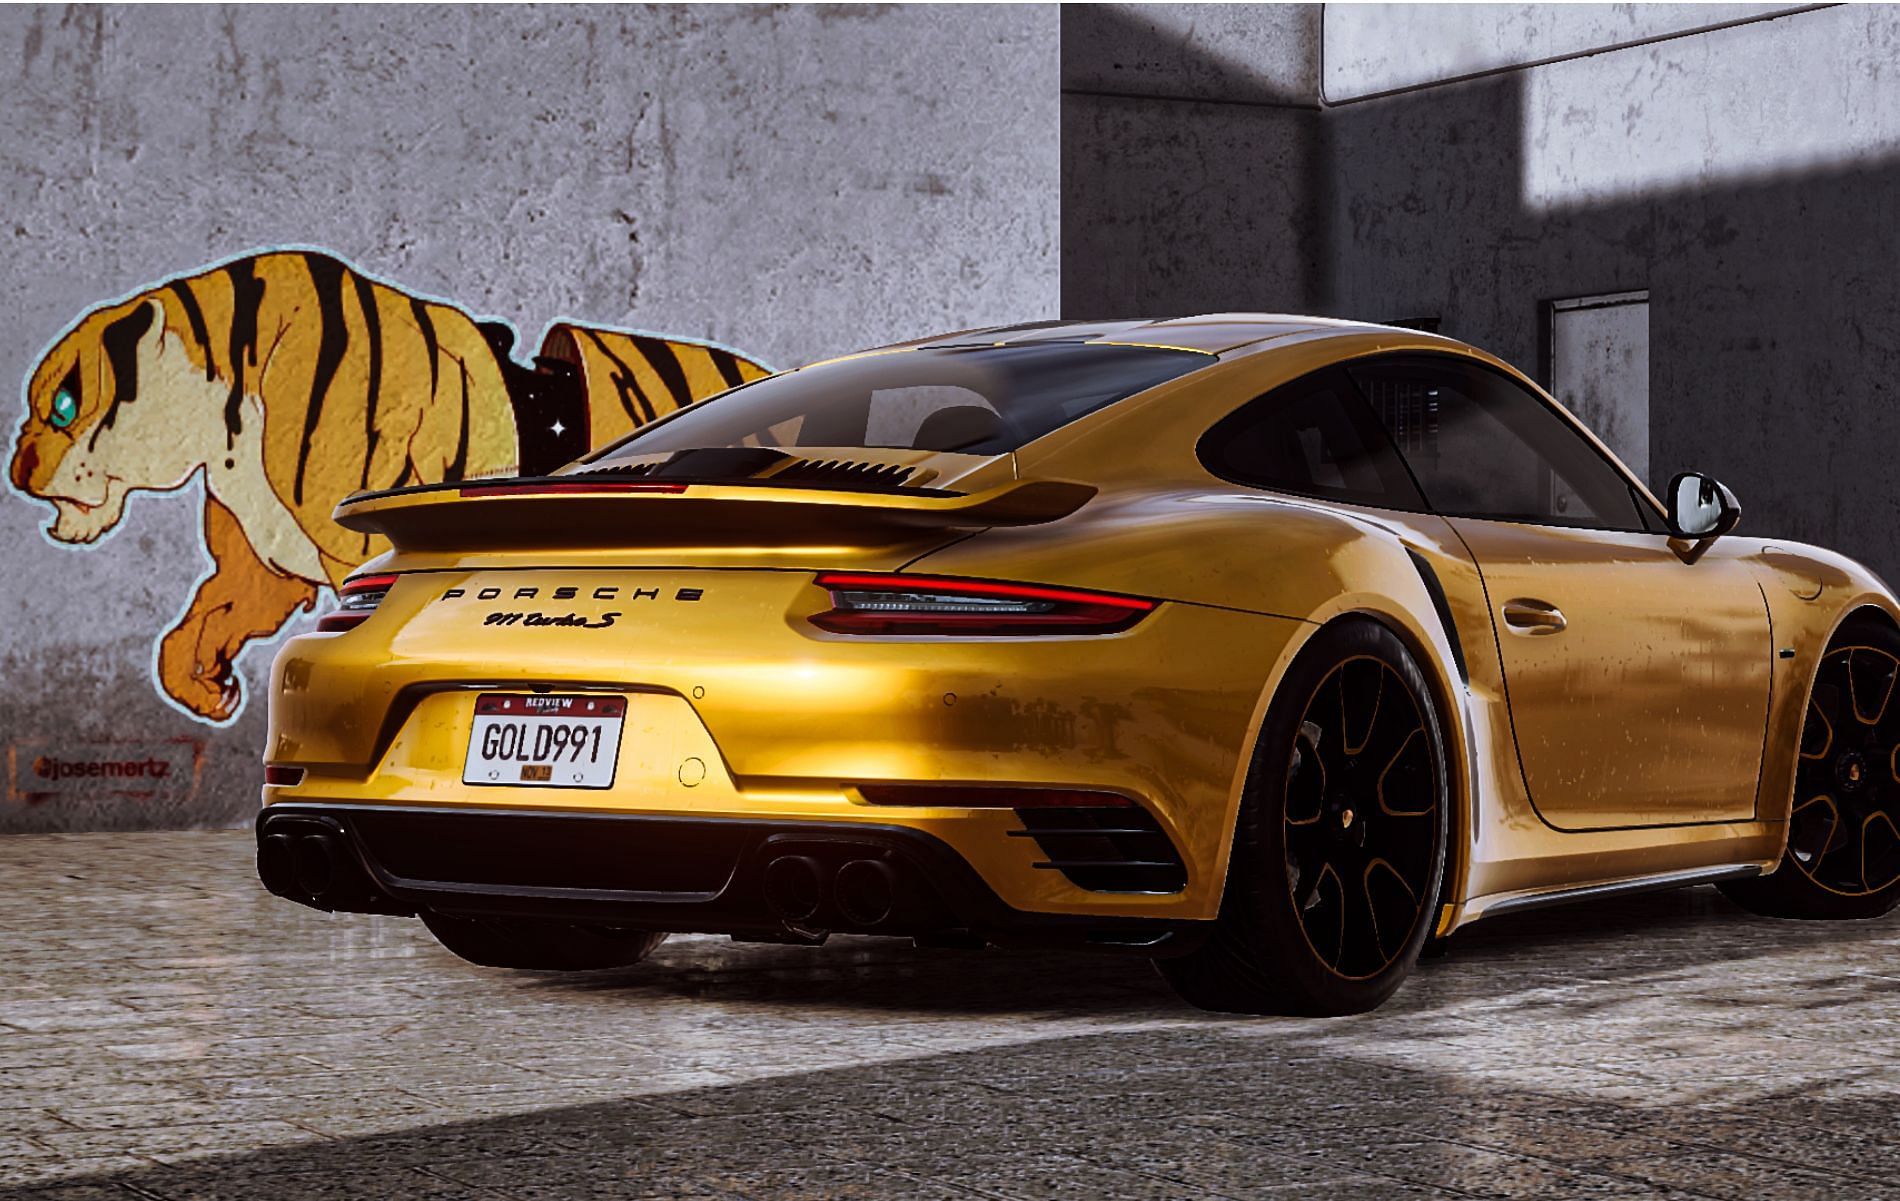 This particular Porche model was an OP car in NFS Heat (Image via Reddit)